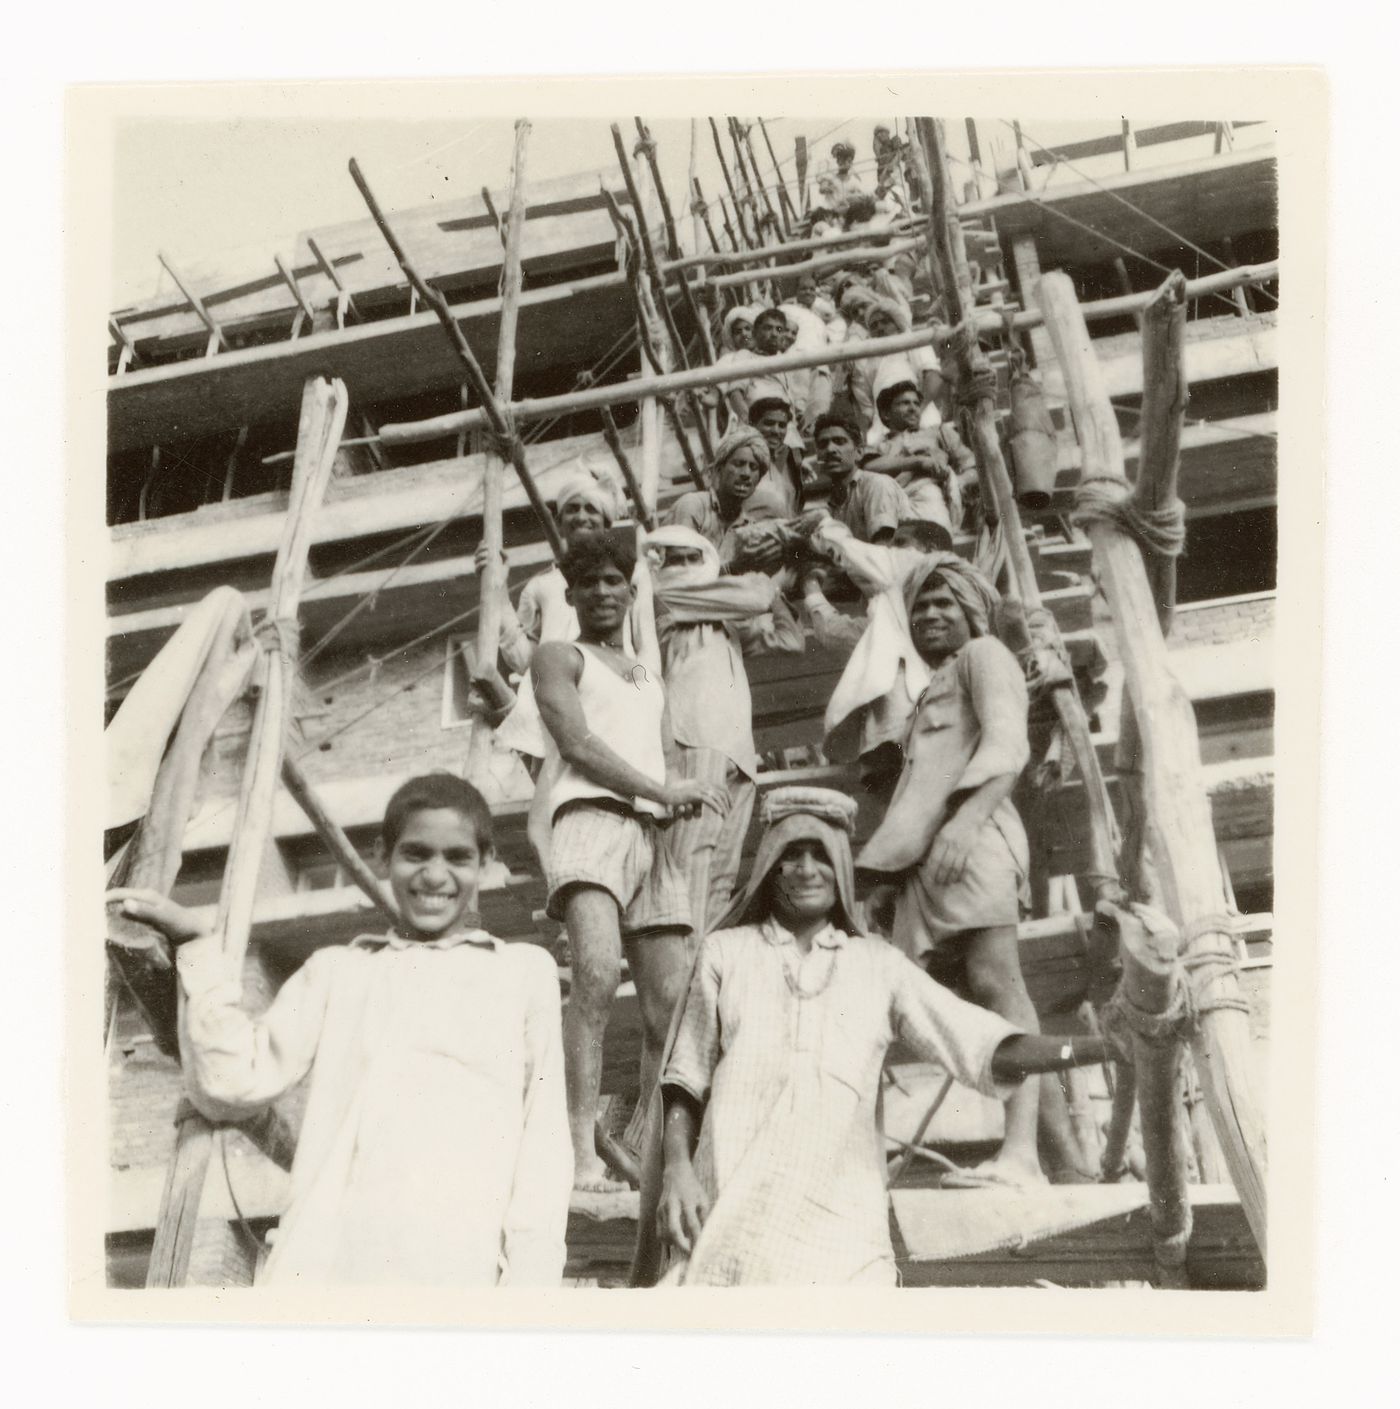 Portrait of construction workers passing on material supplies to upper levels of building, Chandigarh, India